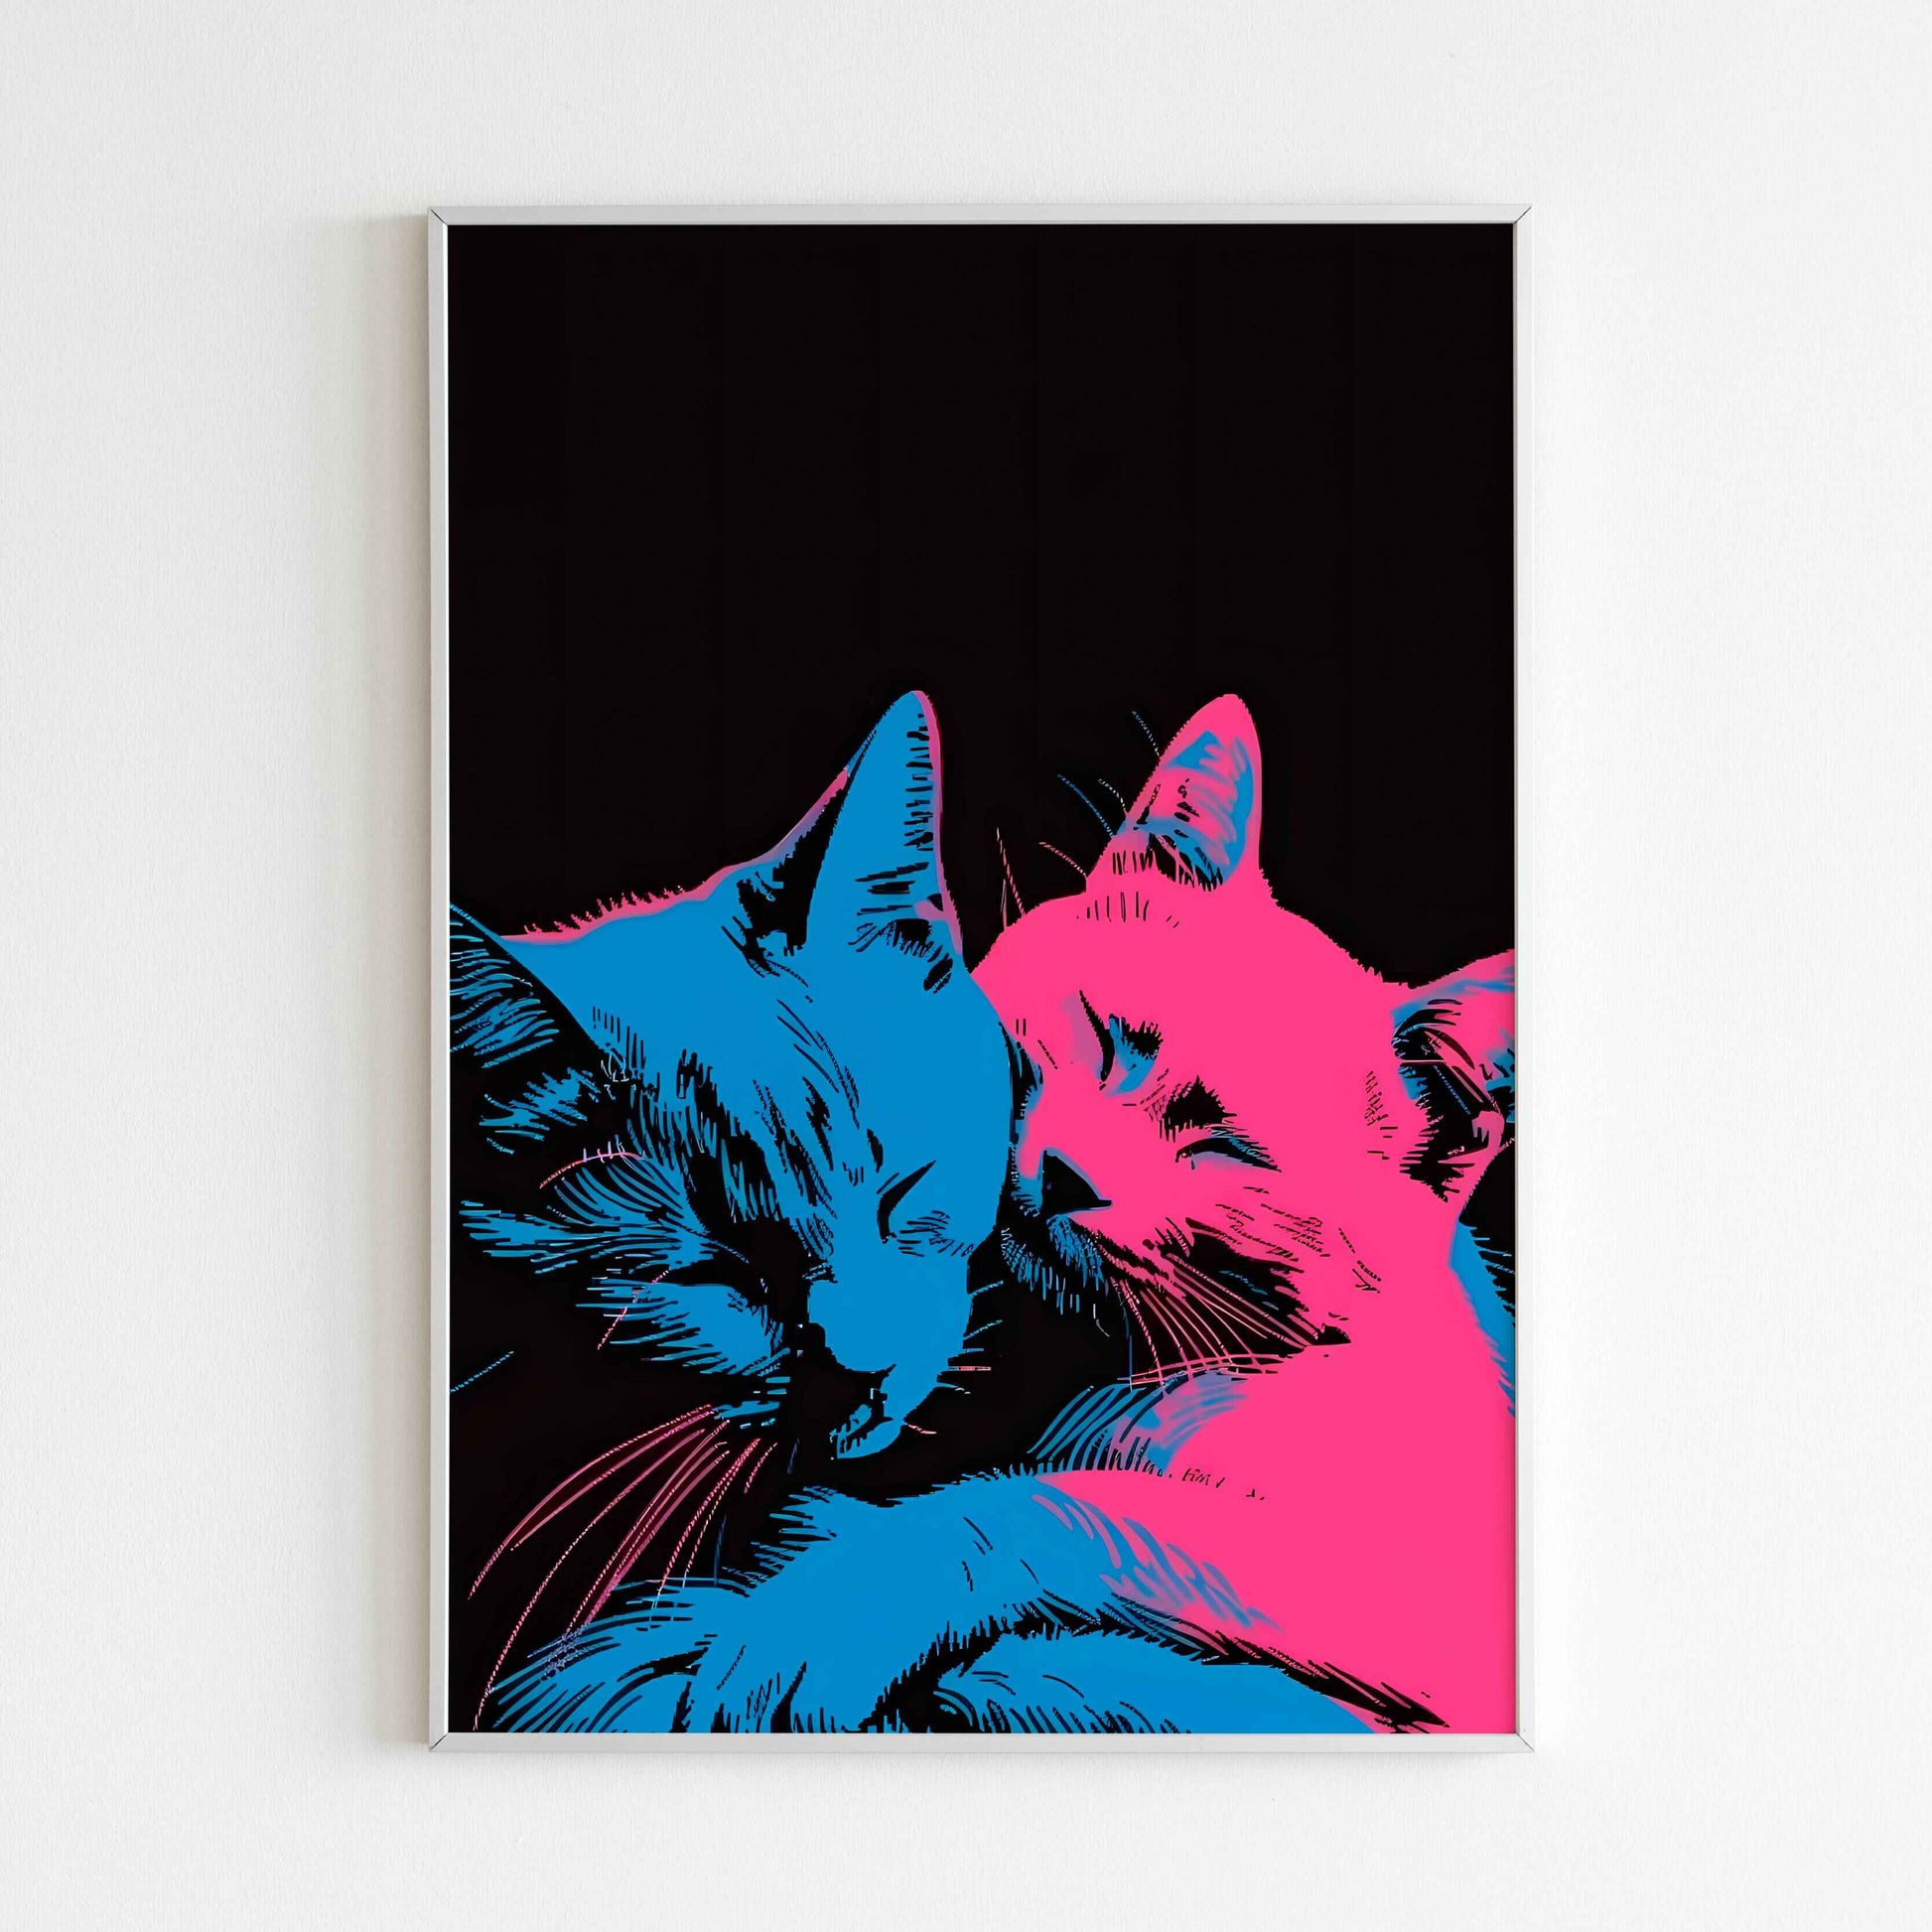 Cuddling Cats printable poster. Feline Affection: The love between cats captured in a moment of cuddling. Available for purchase as a physical poster or digital download